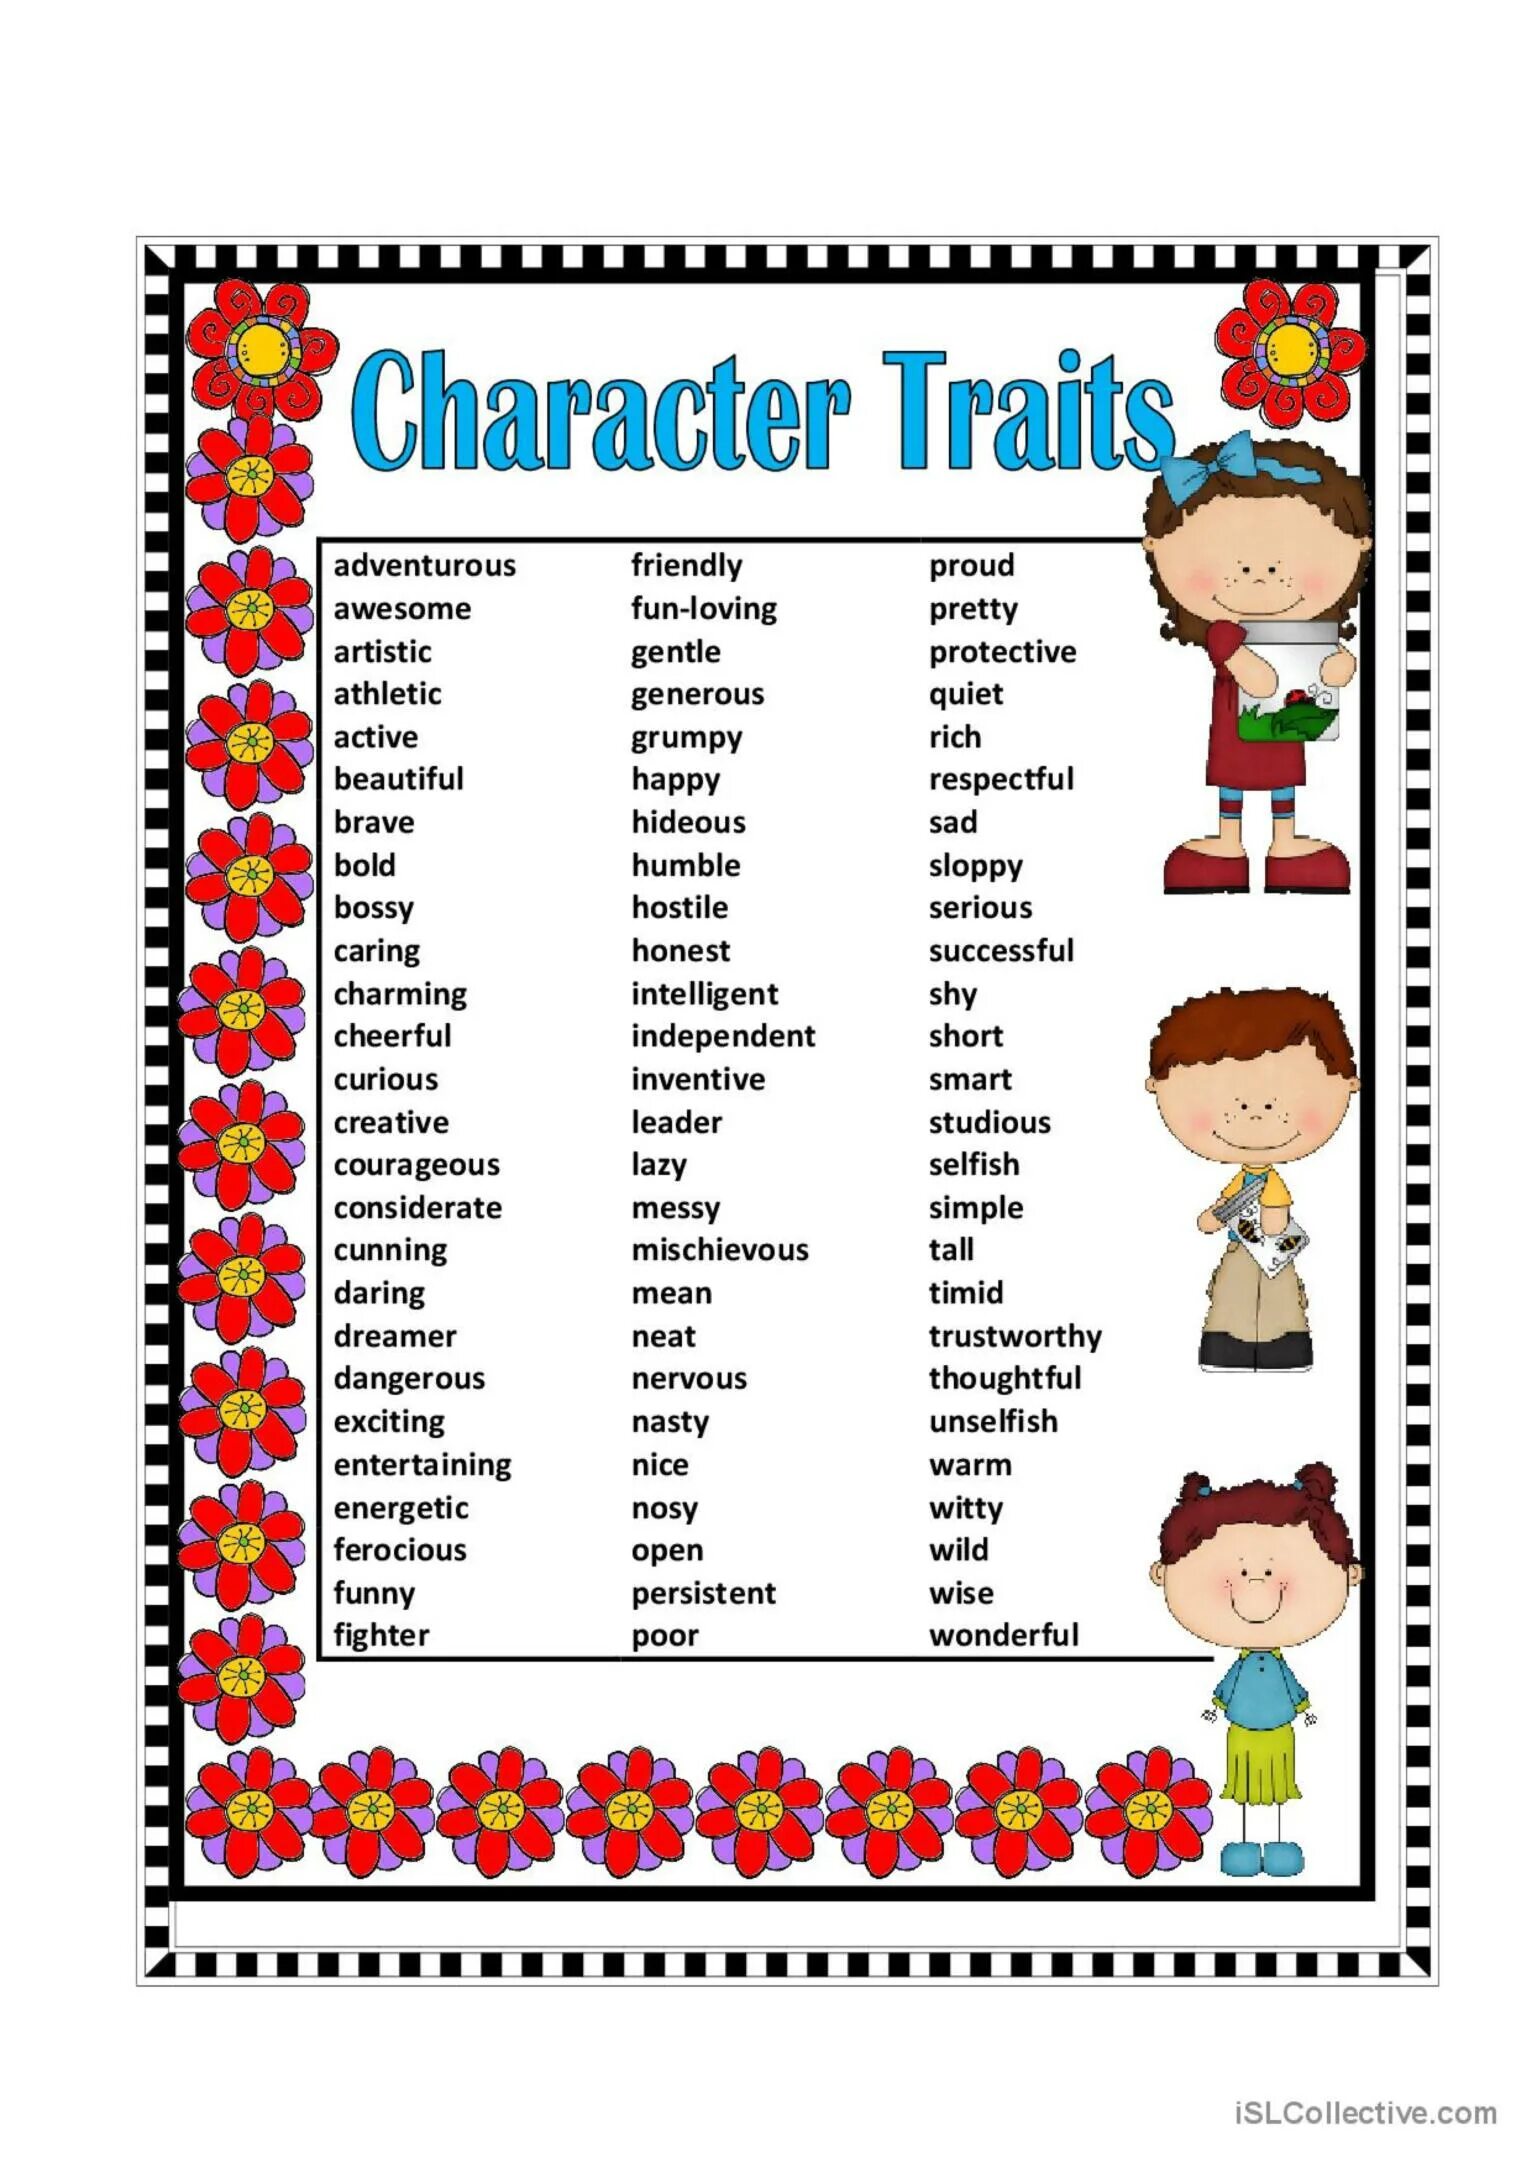 Adjectives traits of character. Traits of character Worksheet. Character traits for Kids. Задания на traits of character. Character adjectives